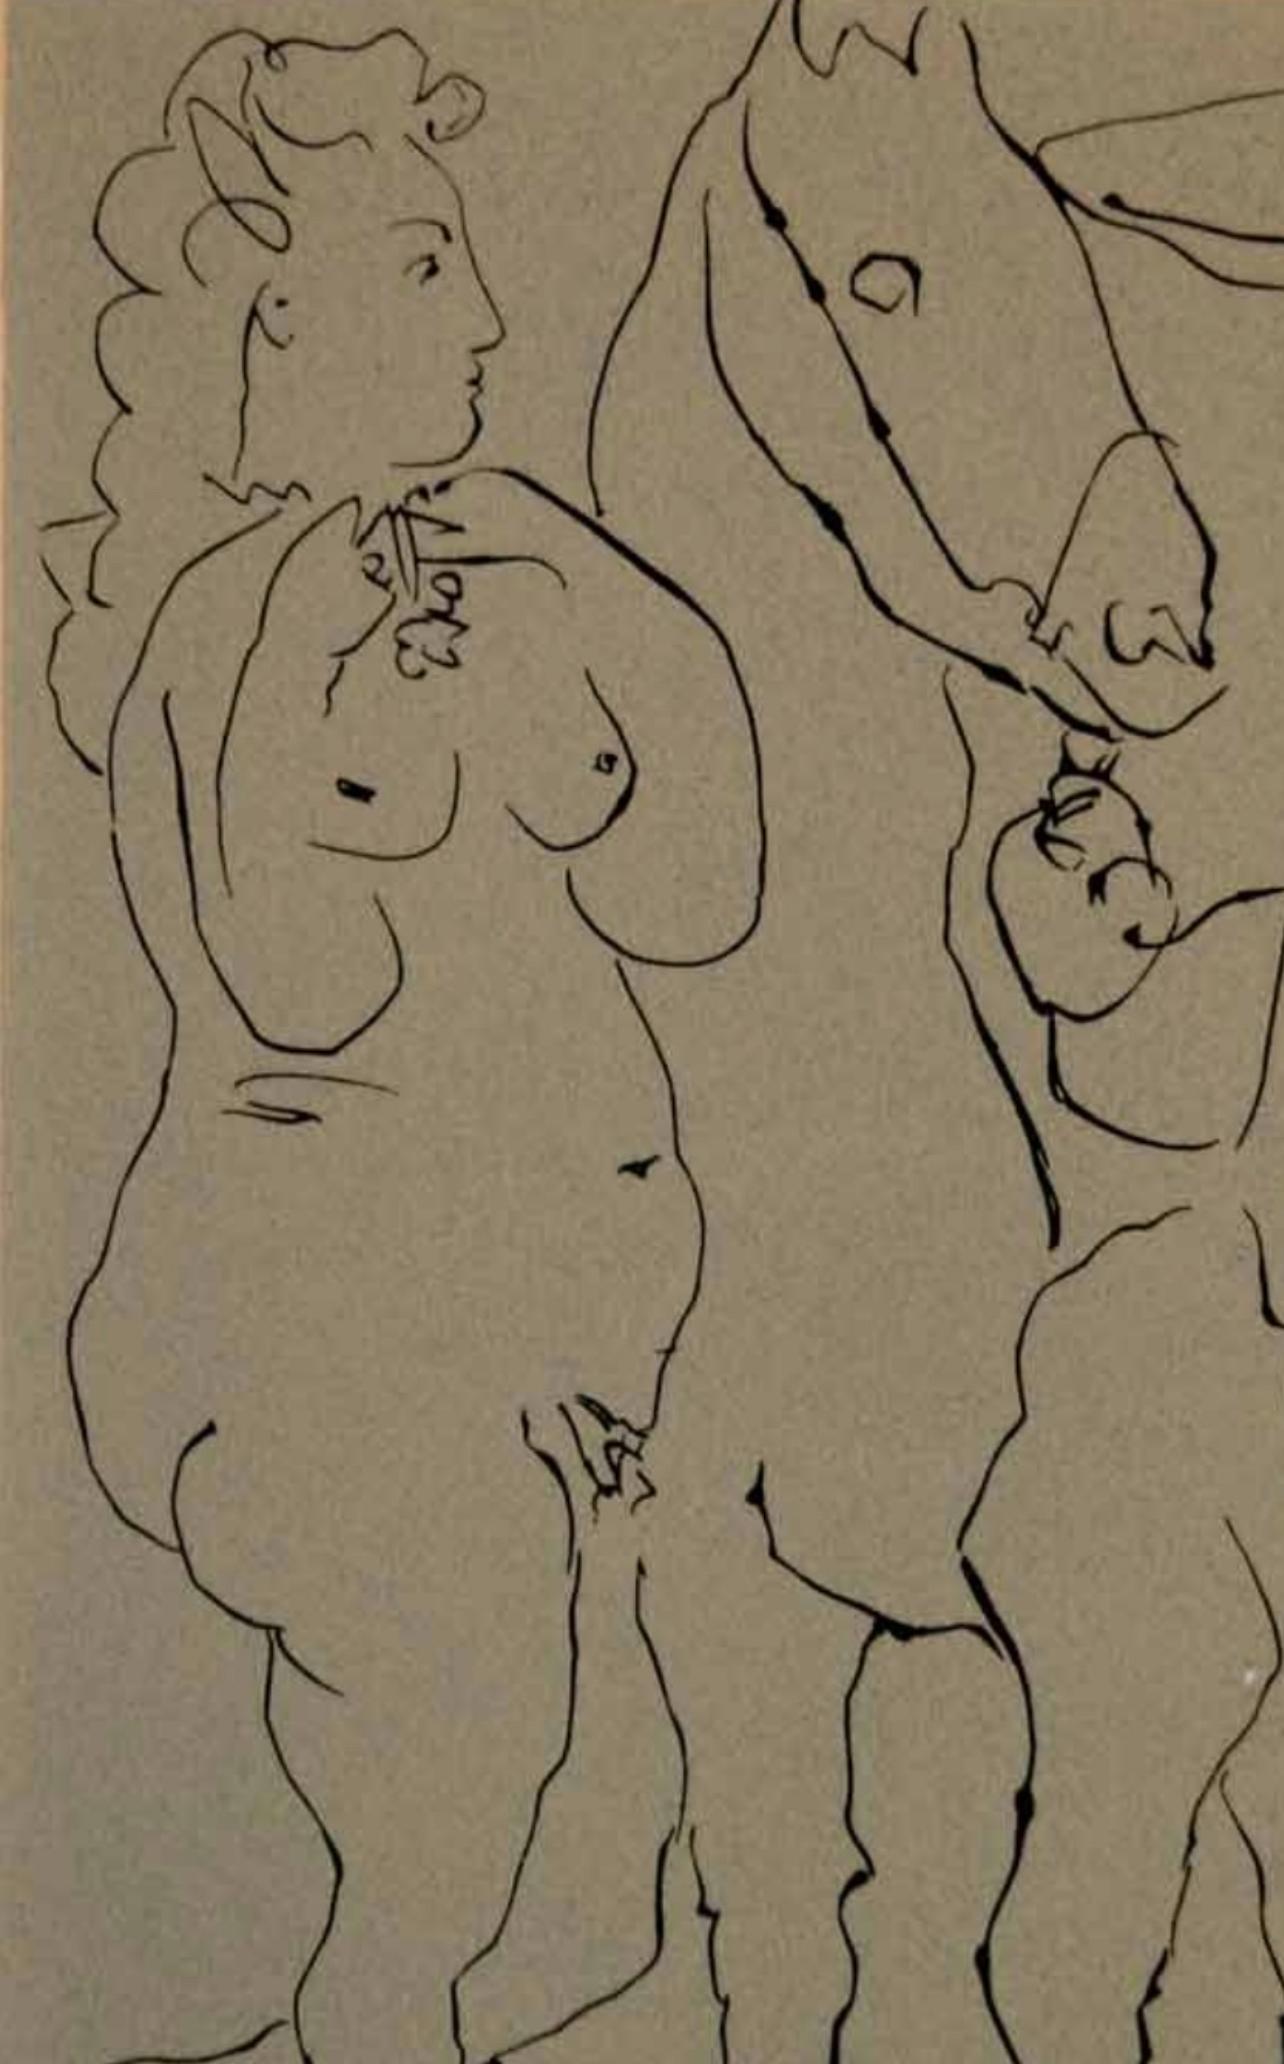 Picasso, Picador, Woman, and Horse, Éditions Cercle d’Art (after) - Print by Pablo Picasso